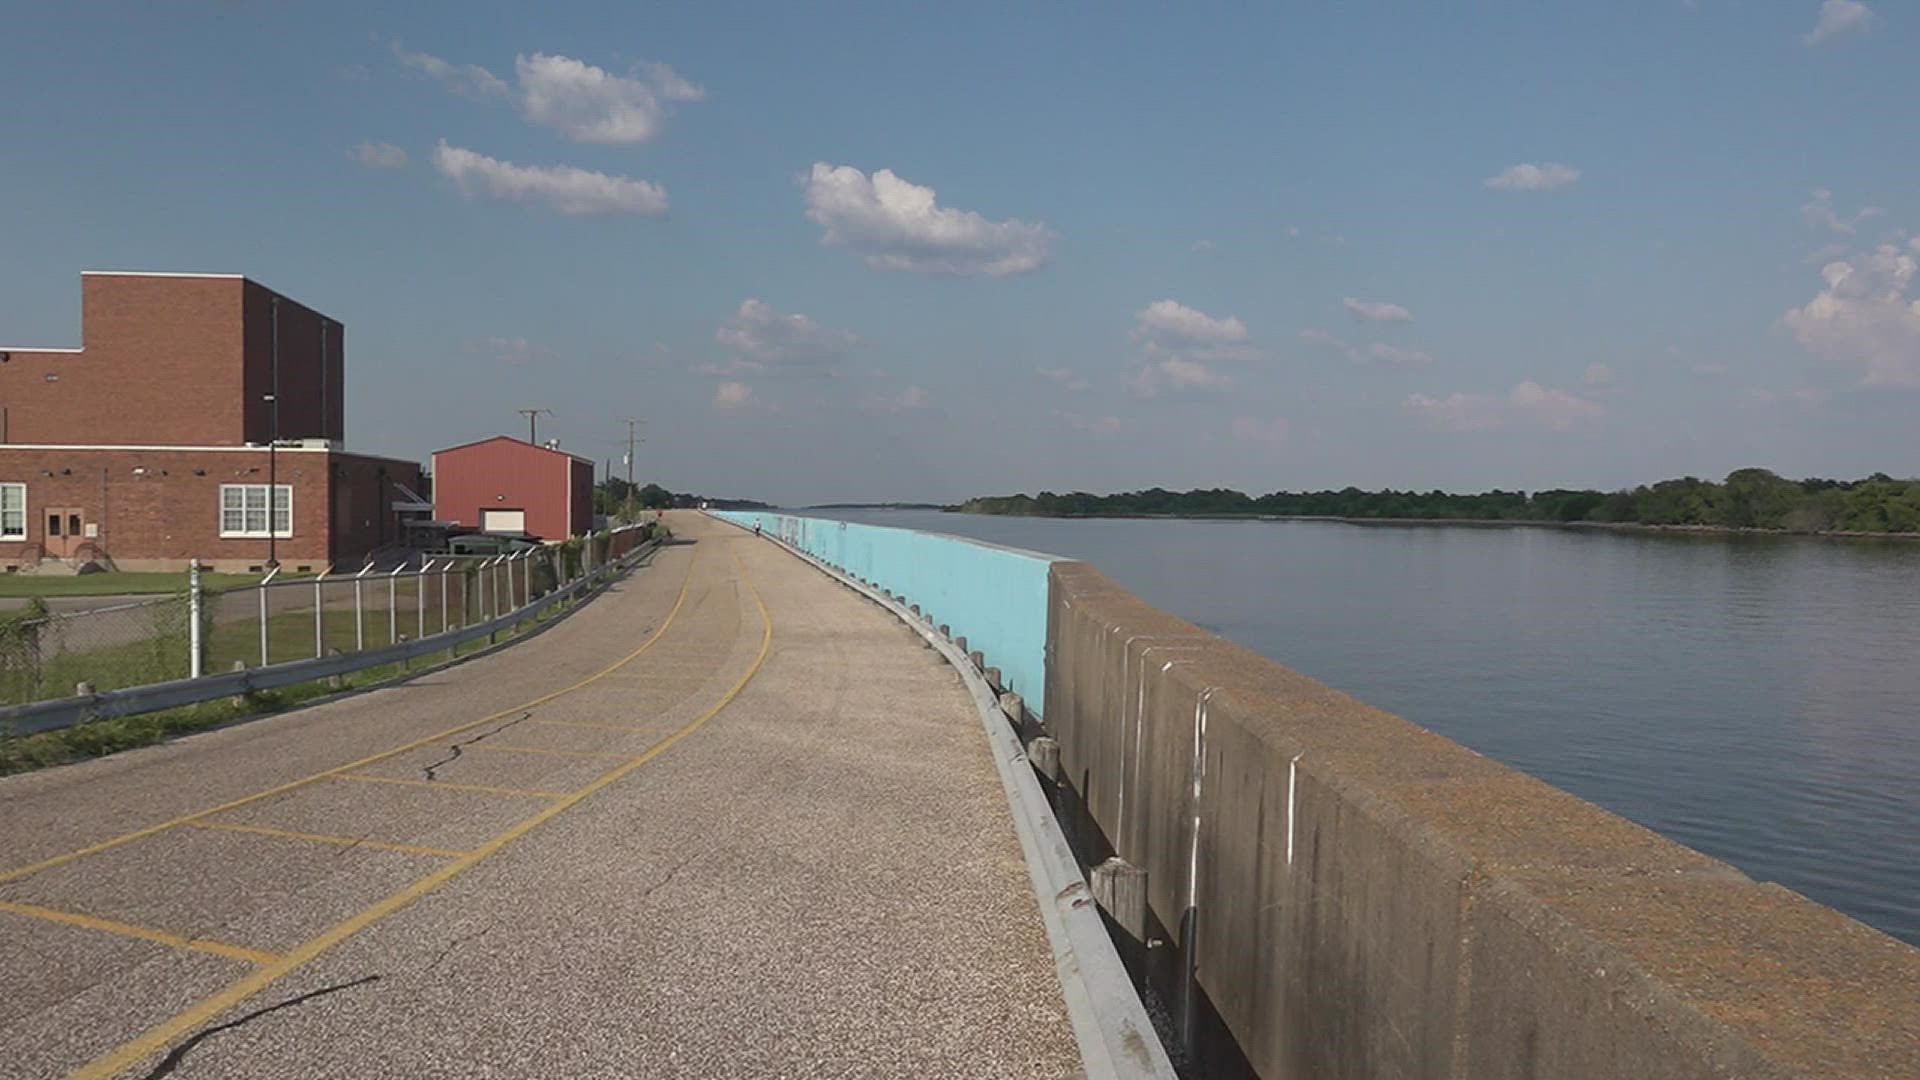 The Port Arthur Project has been underway since 2017. The plan is to raise existing levees and build new ones. Some would be as tall as 19 feet.